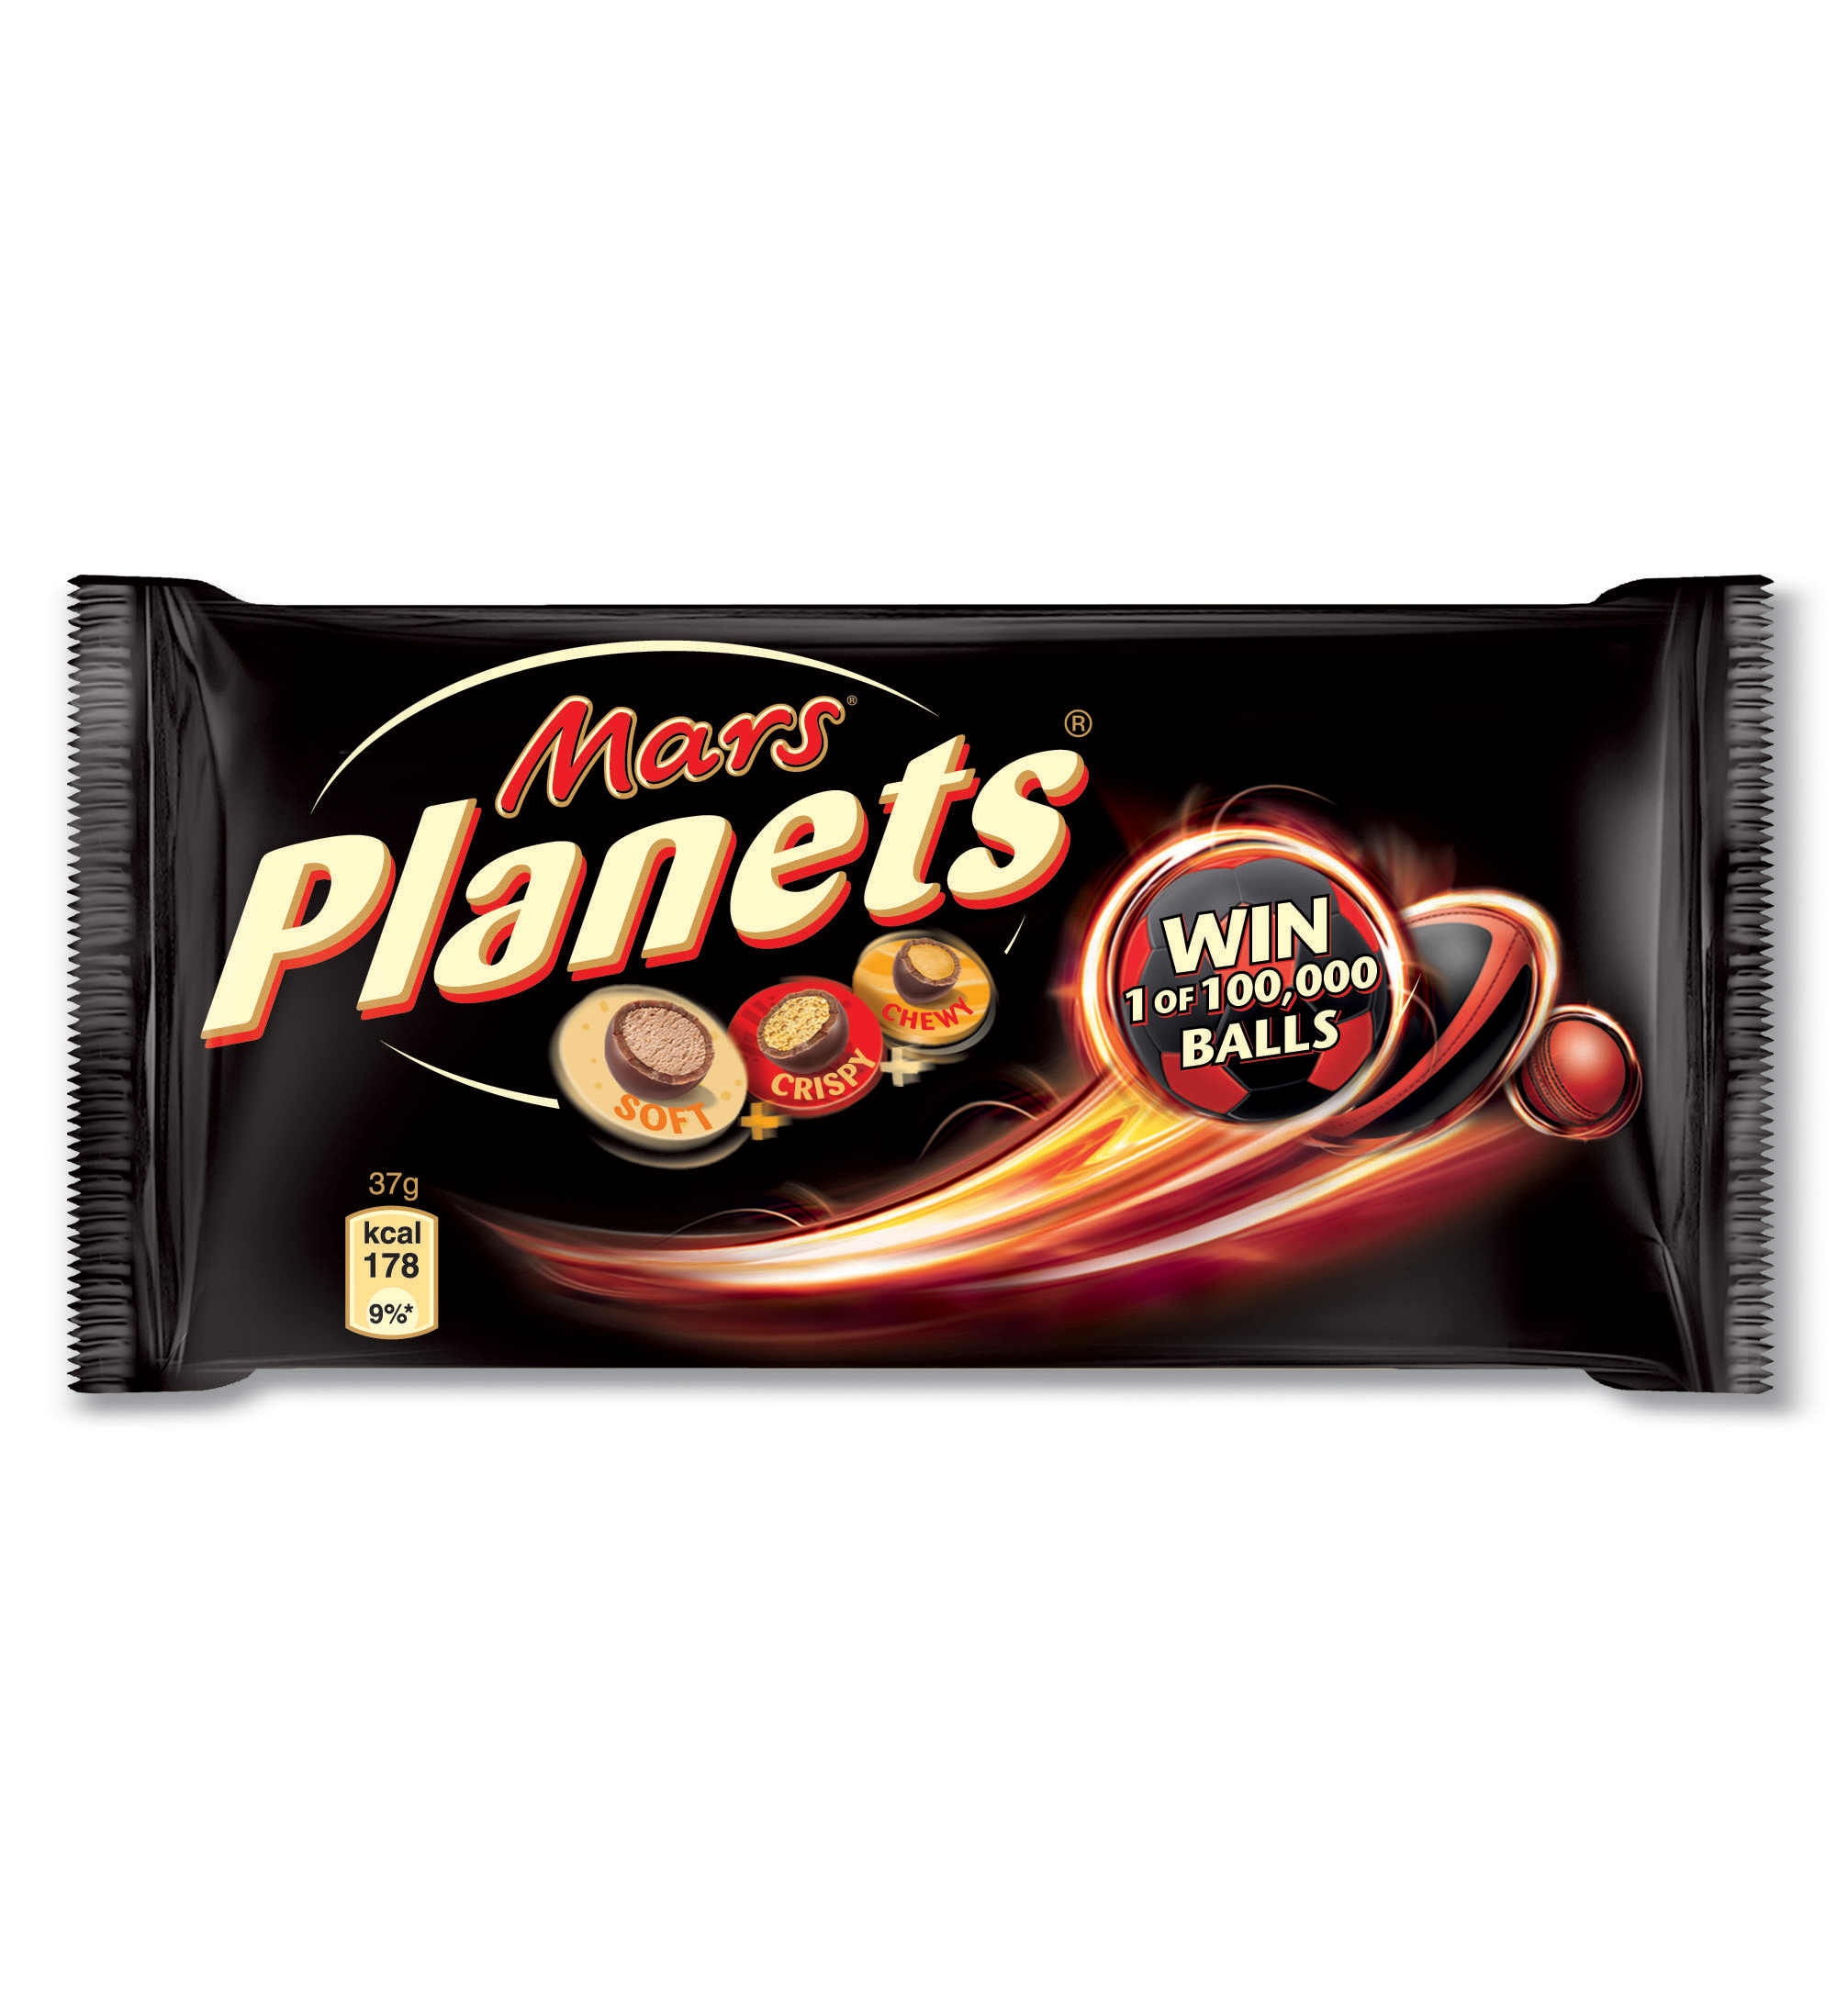 Mars Planets used to be a popular treat before they were taken off shelves